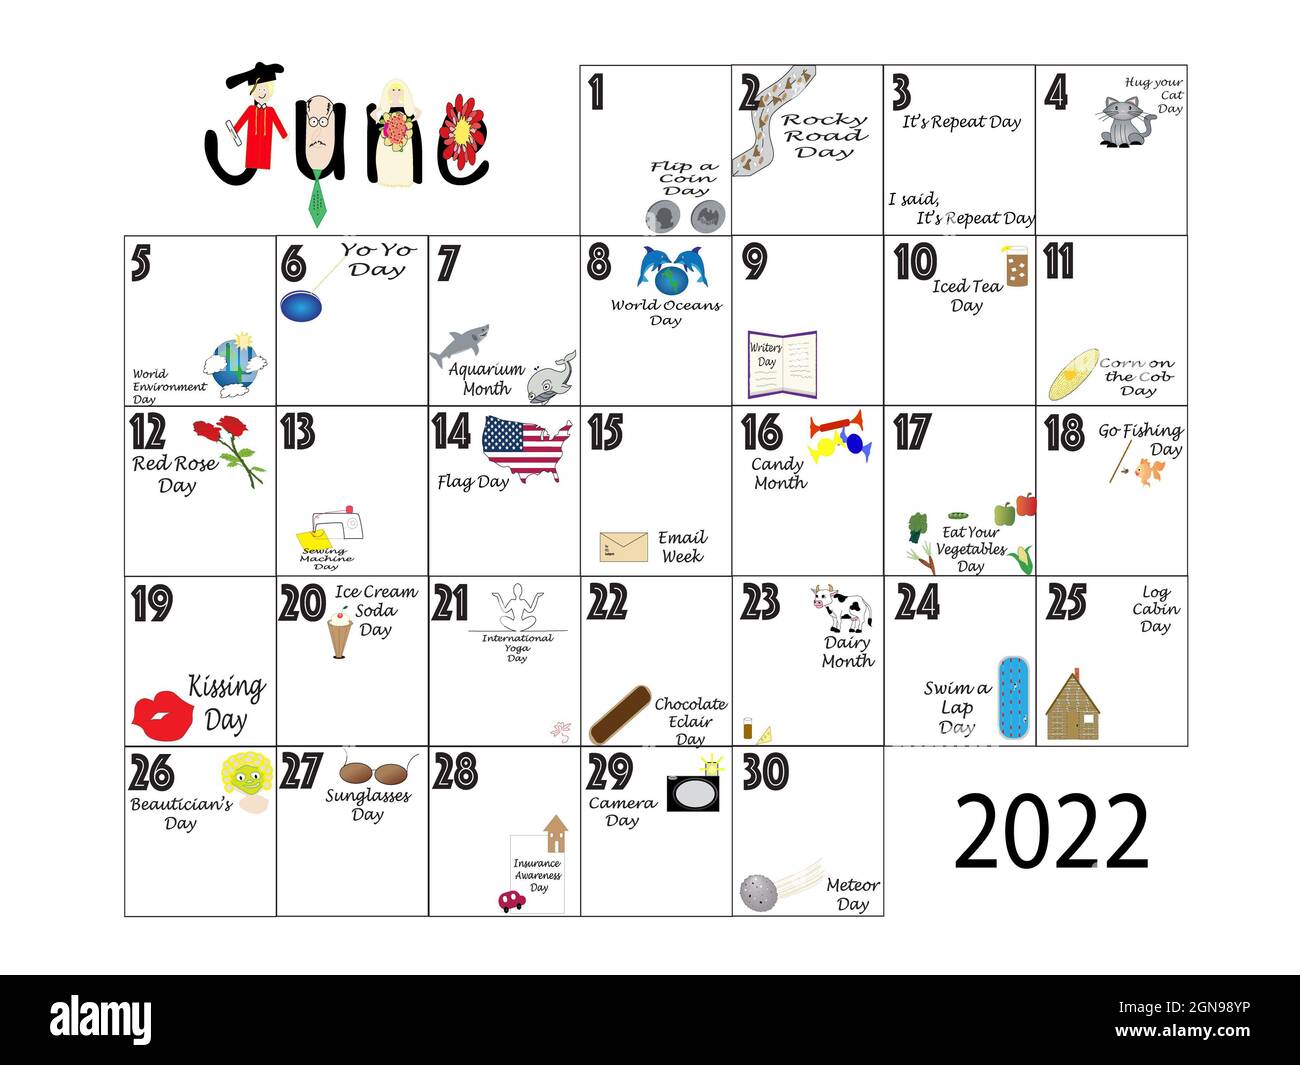 June Calendar 2022 With Holidays June 2022 Illustrated Monthly Calendar Of Quirky Holidays And Unusual  Celebrations In Colorful Graphics On White Stock Photo - Alamy